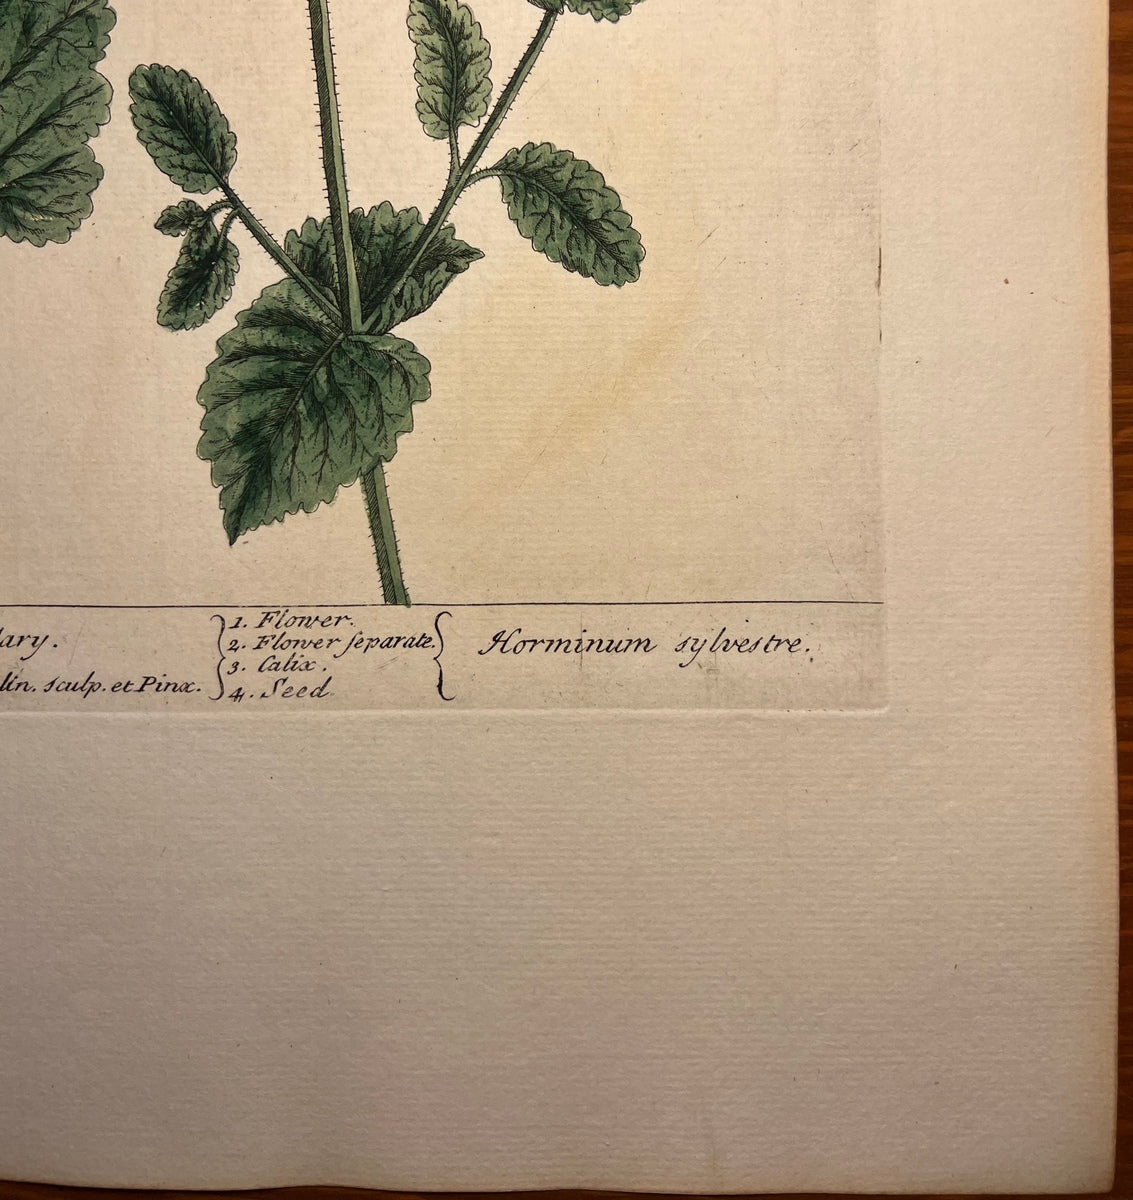 Antique Wild Clary, Plate #256, From Elizabeth Blackwell's 'A Curious Herbal'